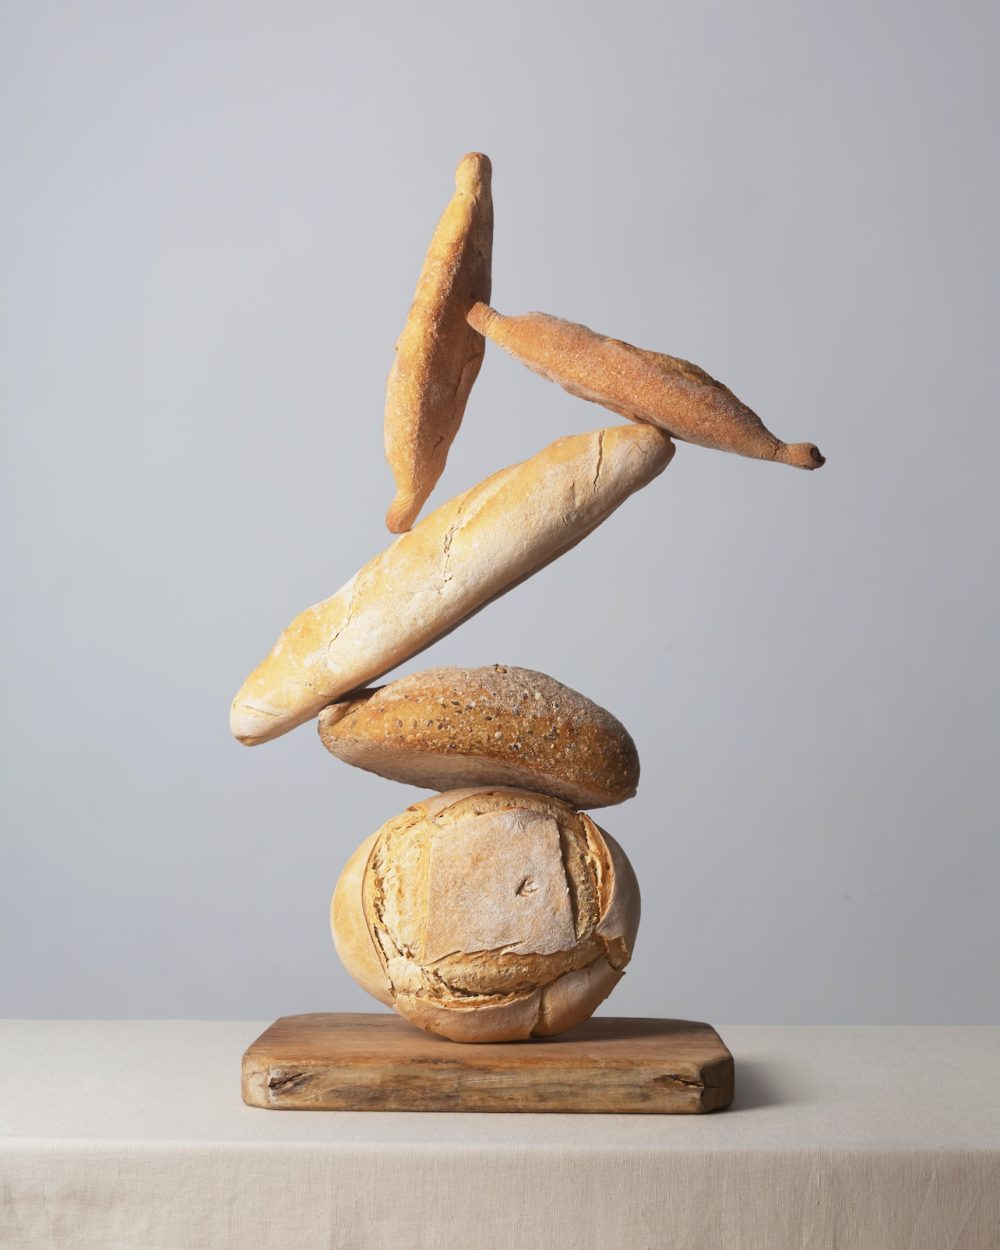 Balancing Bread on a table covered with a tablecloth